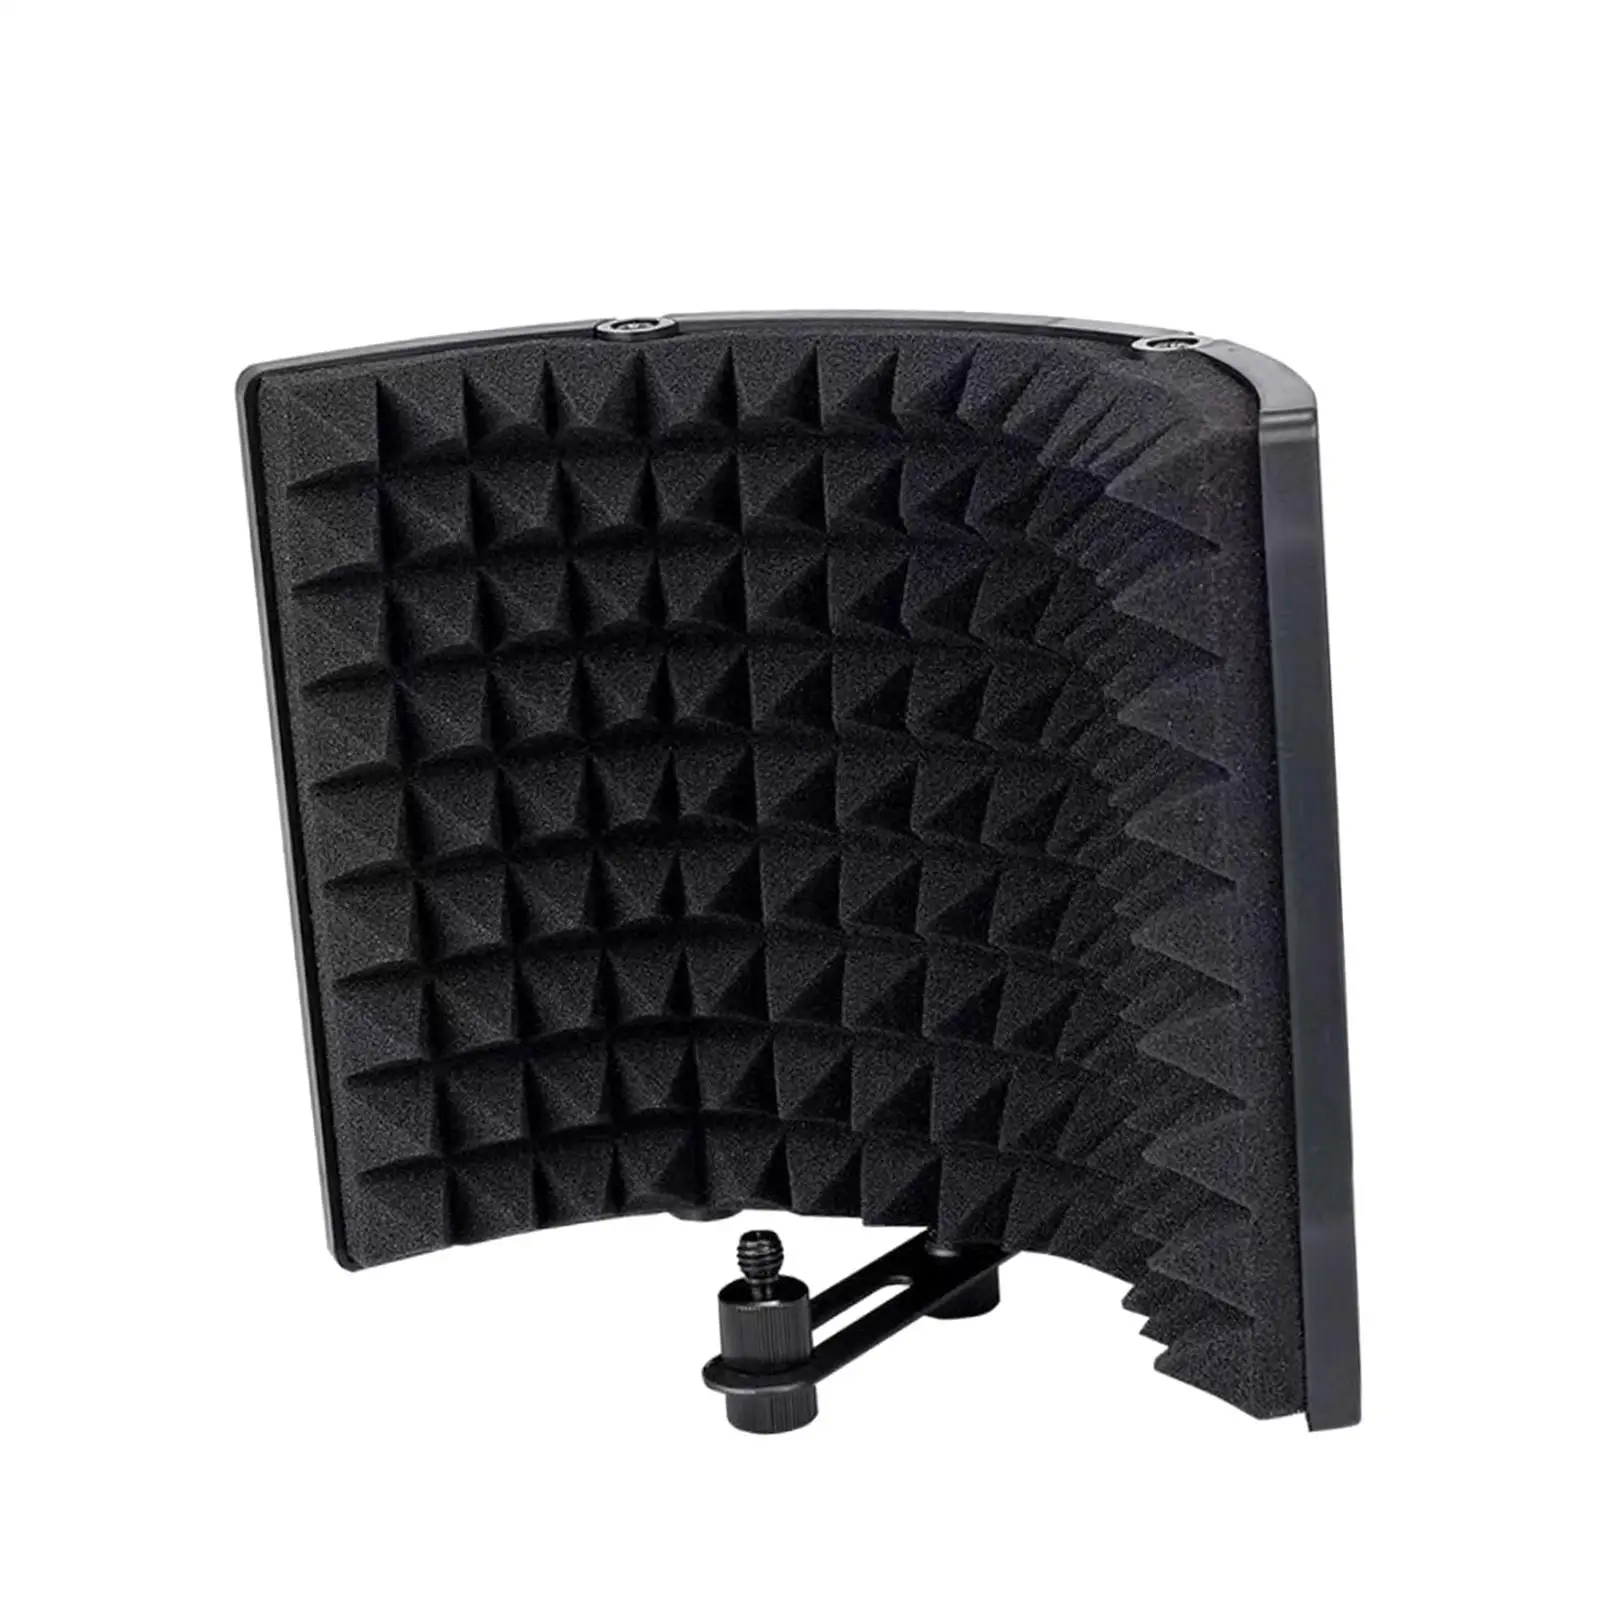 3 Panels Microphone Isolation Shield Adjustable for Singing Podcasts